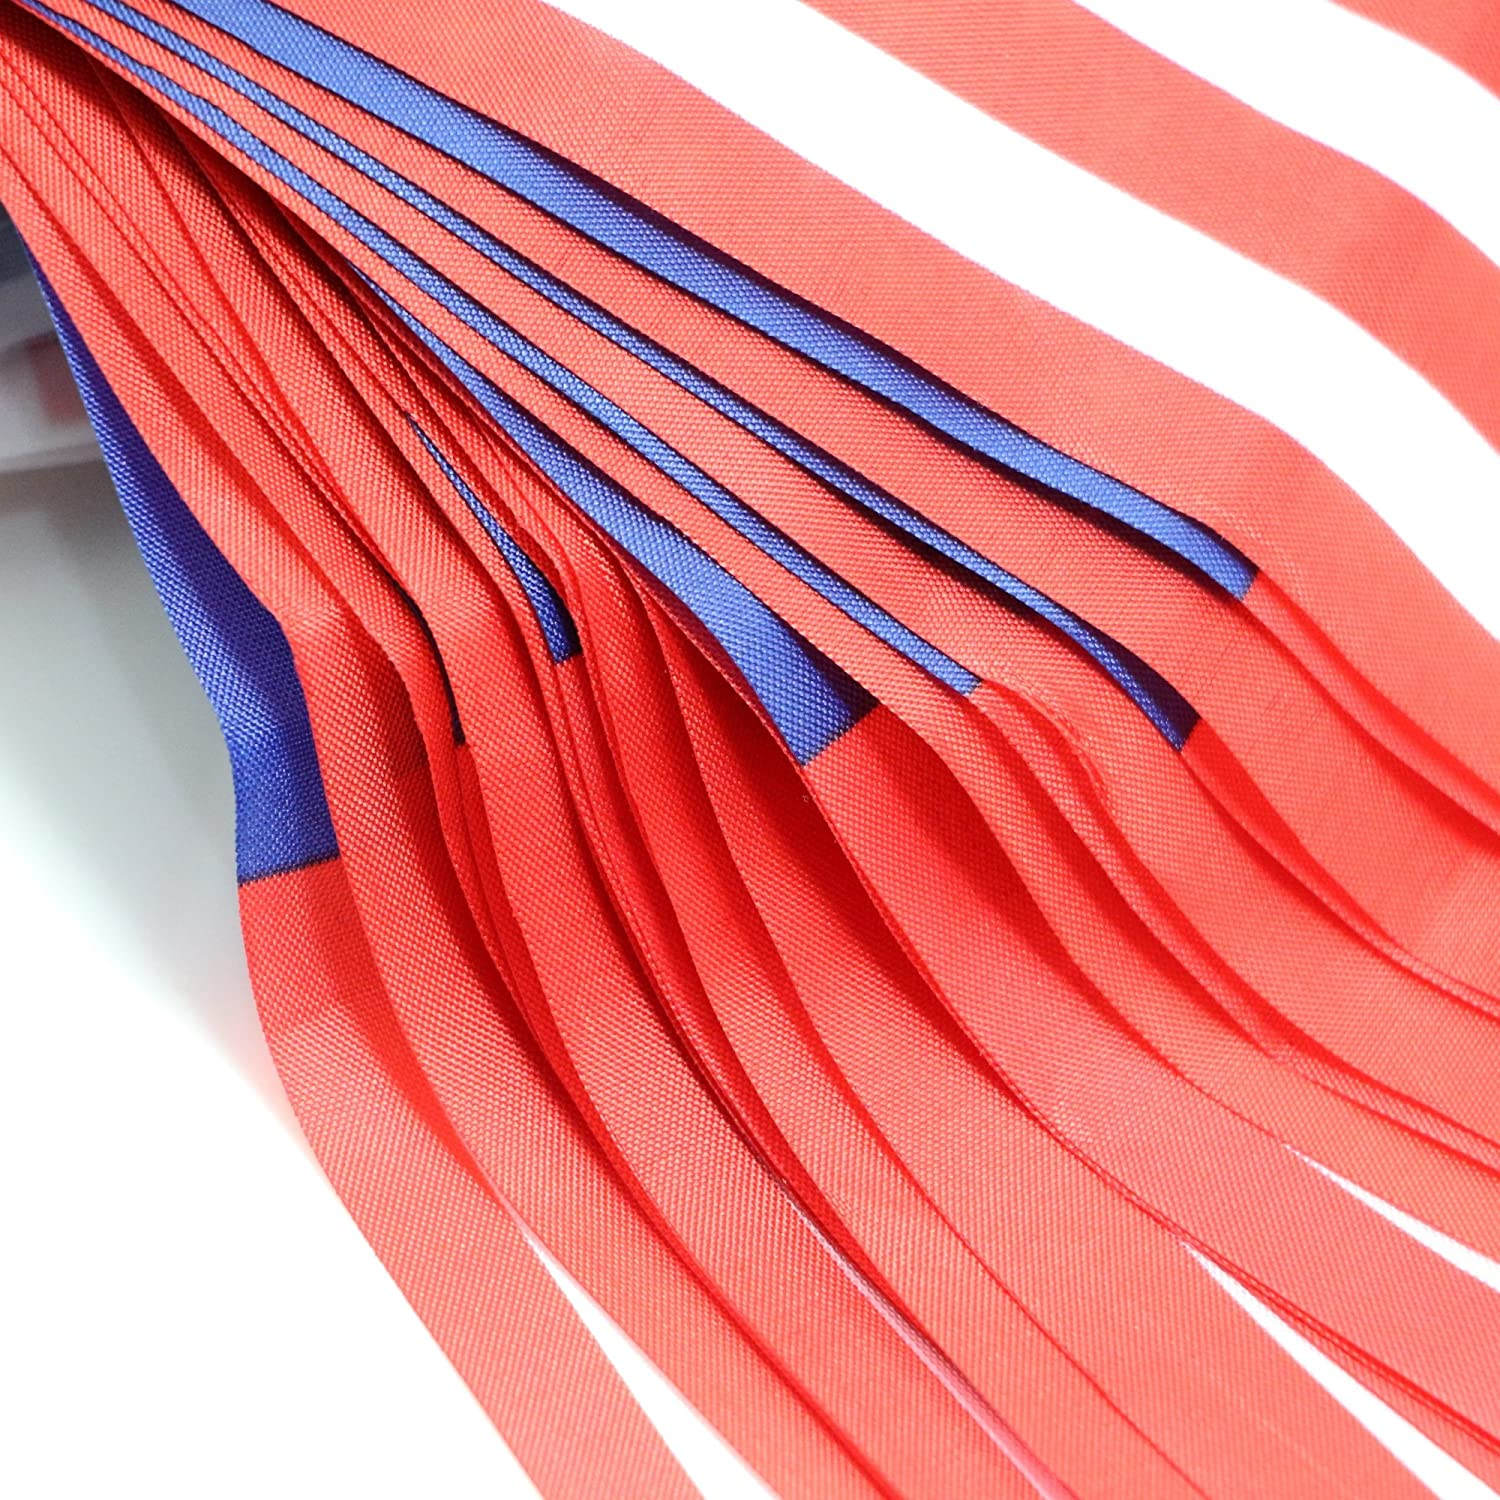 USA American String Pennant Banners, Patriotic Events 4Th of July Independence Day Decoration Sports Bars - 33 Feet 38 Flags